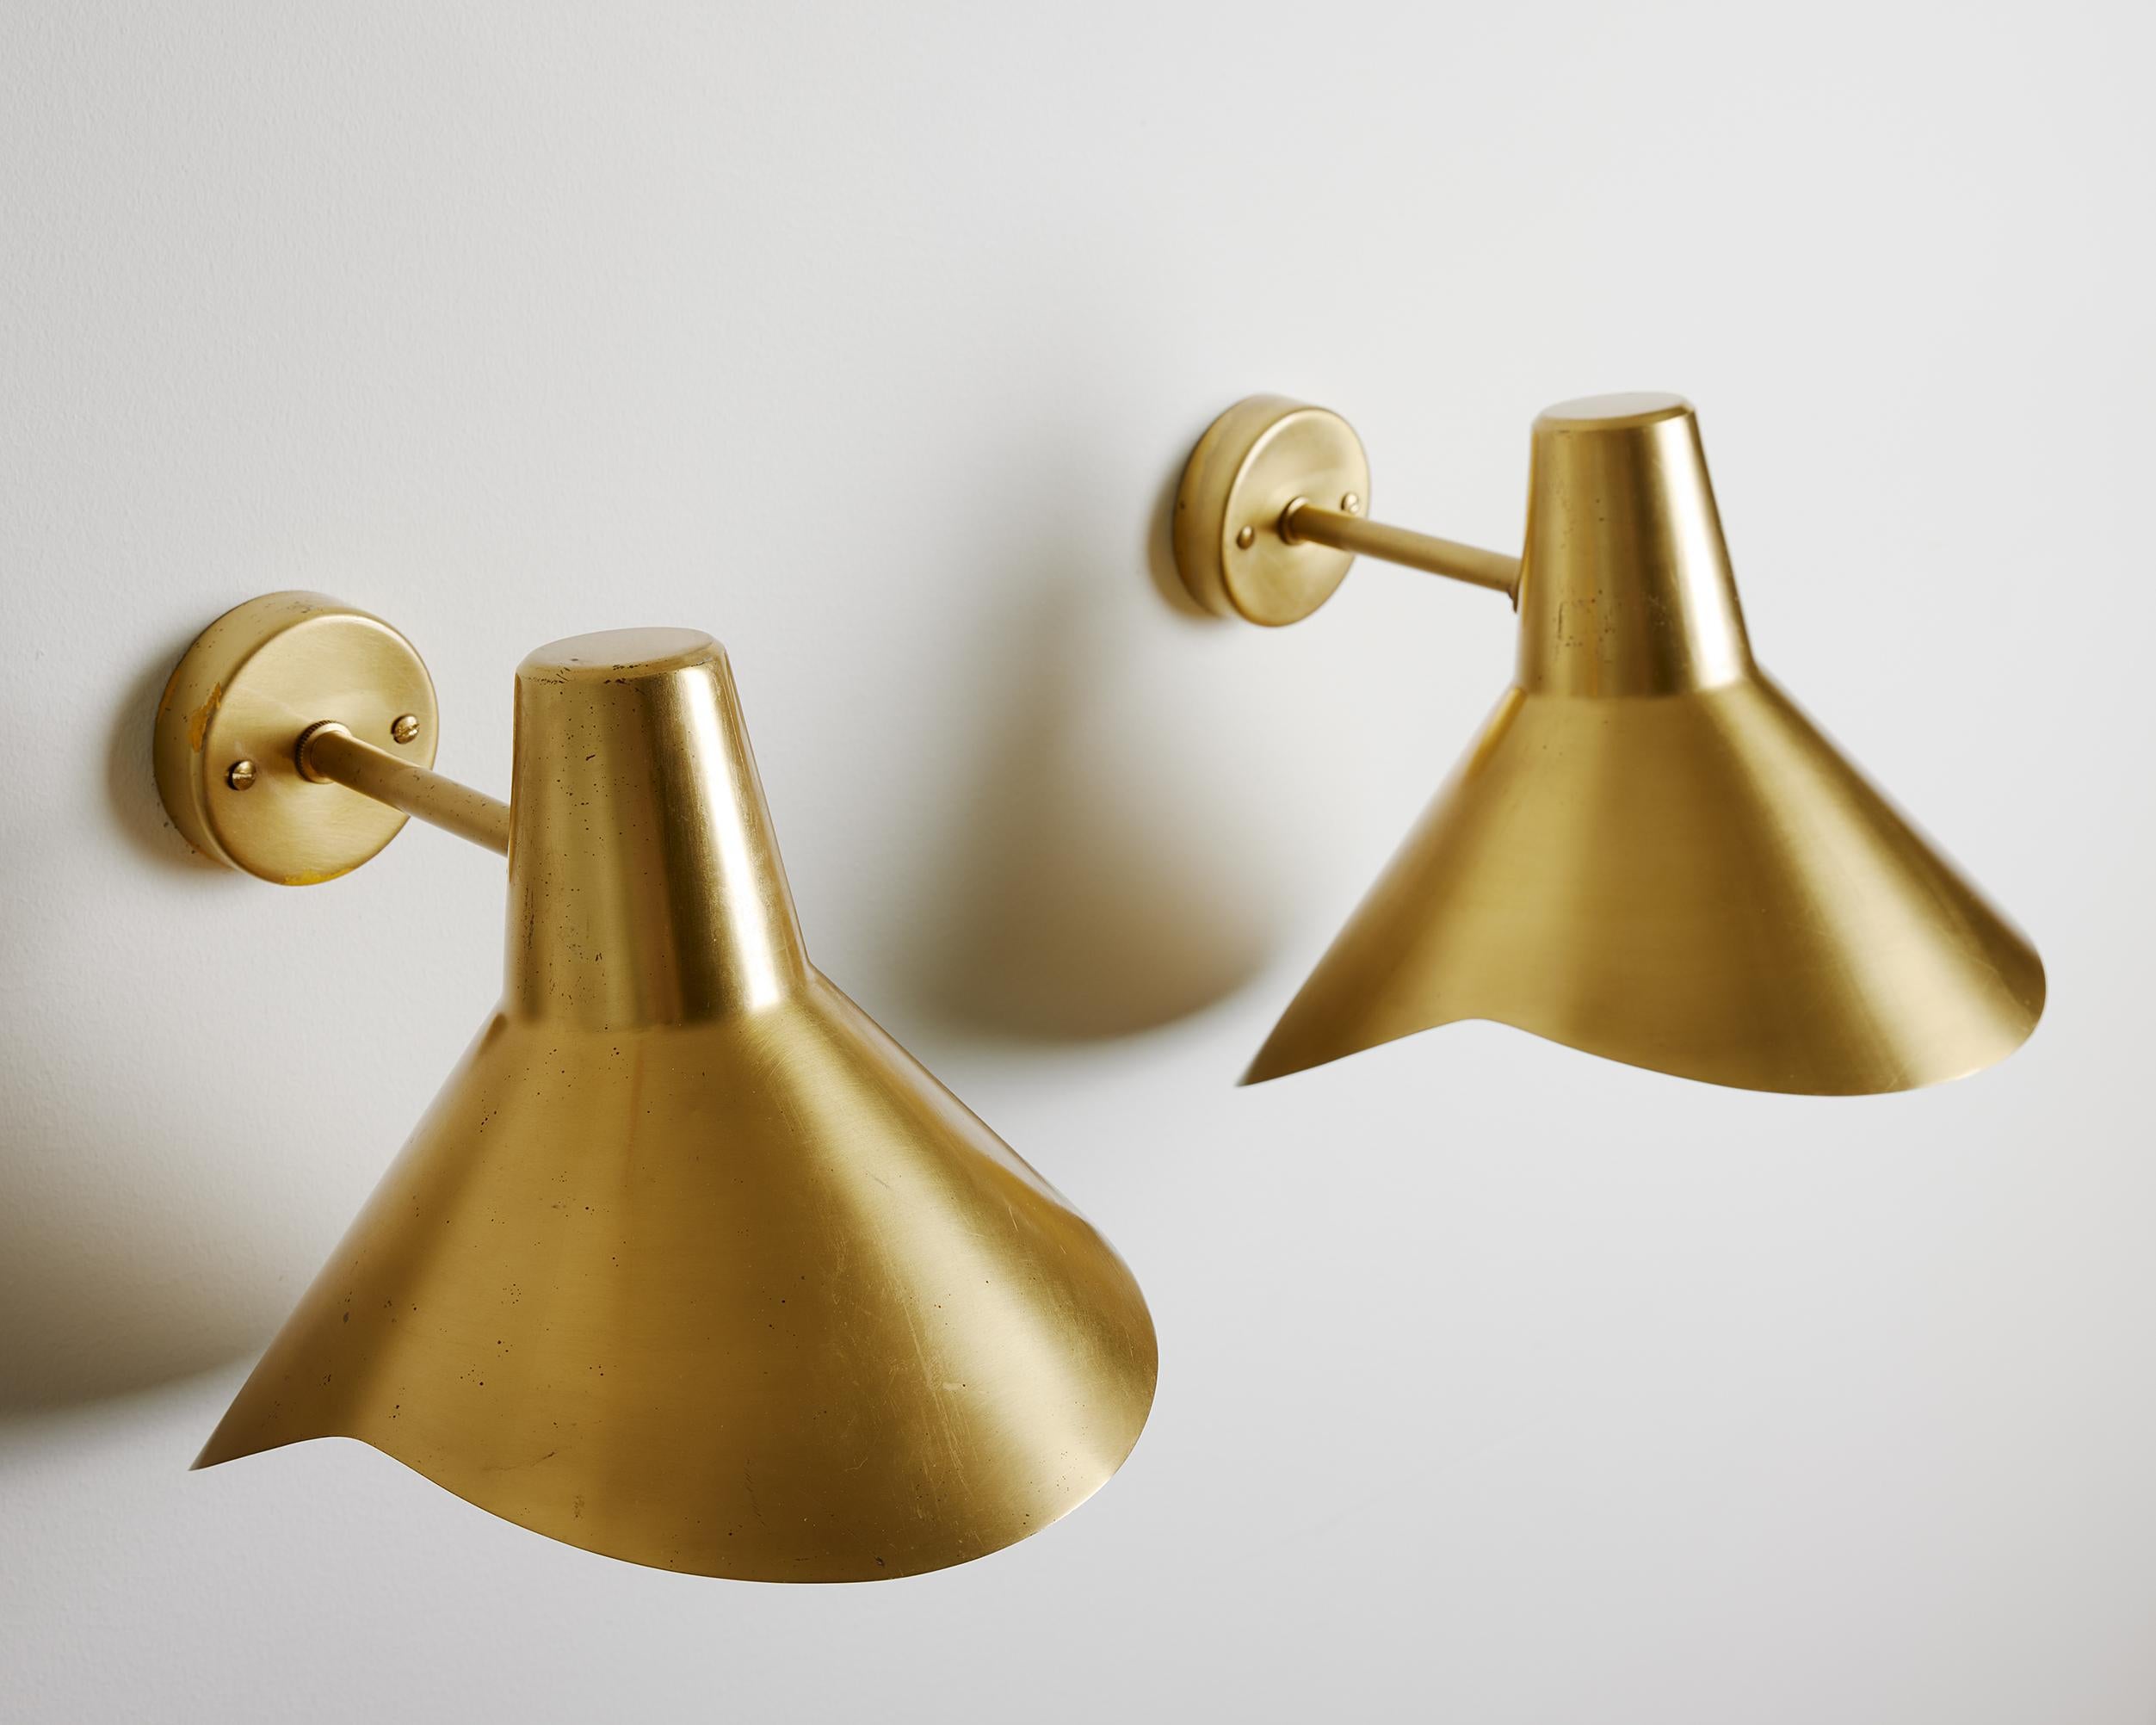 Pair of Brass Wall Lamps Model V319 Designed by Hans Bergström for Ateljé Lyktan In Good Condition For Sale In Stockholm, SE